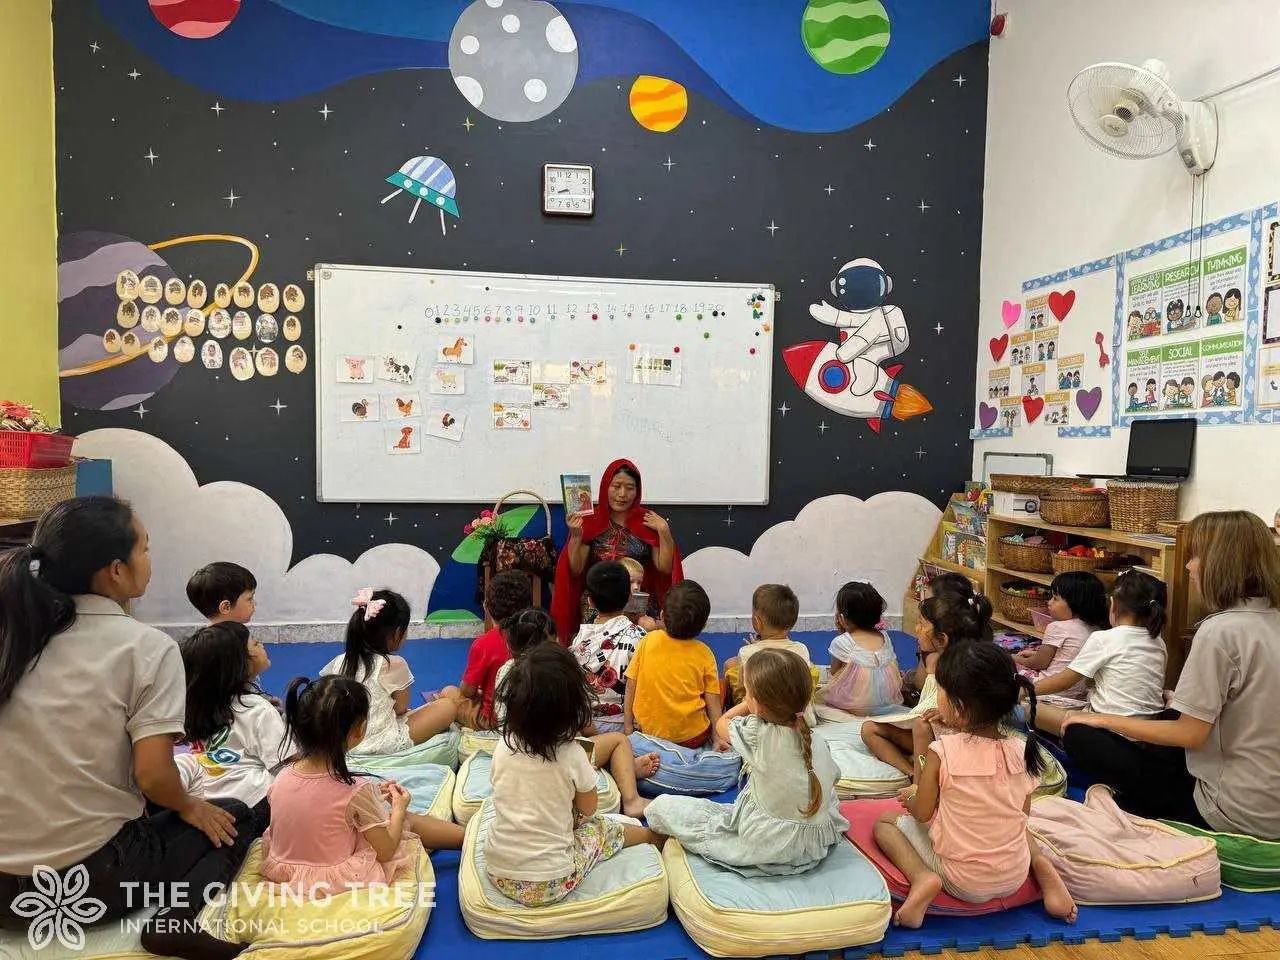 📚✨ Yesterday at The Giving Tree International School, we celebrated World Book Day in the most magical way!
 ✨📚 Our learners stepped into the shoes of their favorite characters, bringing stories to life as they walked through our doors dressed in t